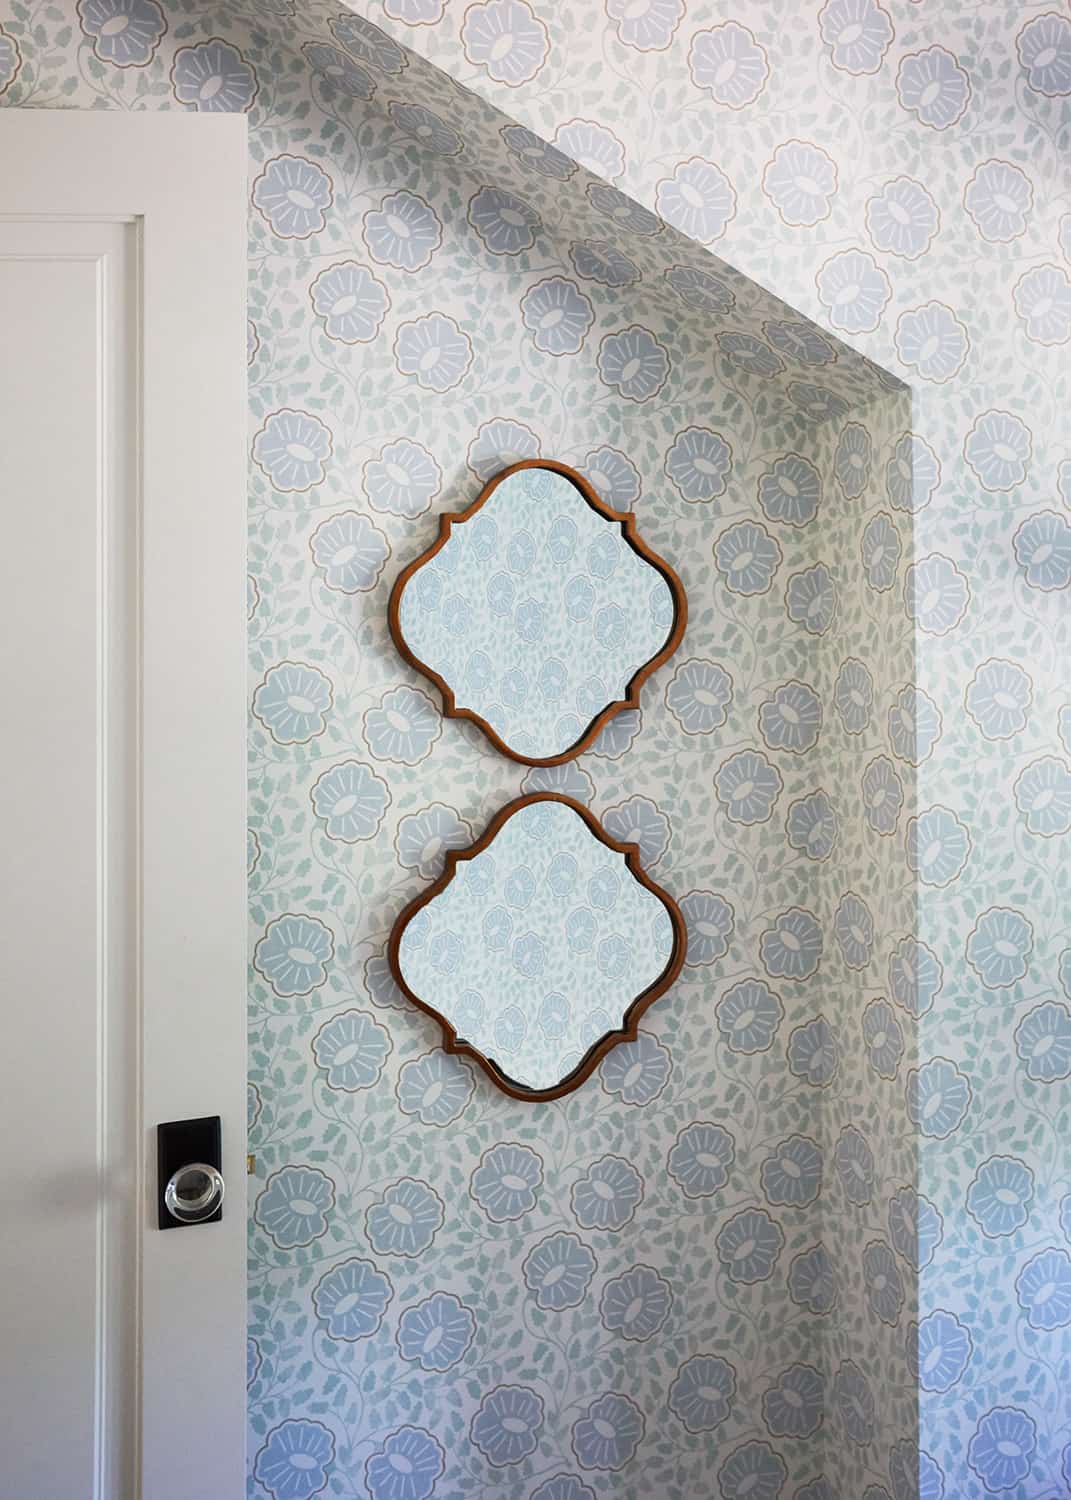 two mirrors on patterned wallpaper wall